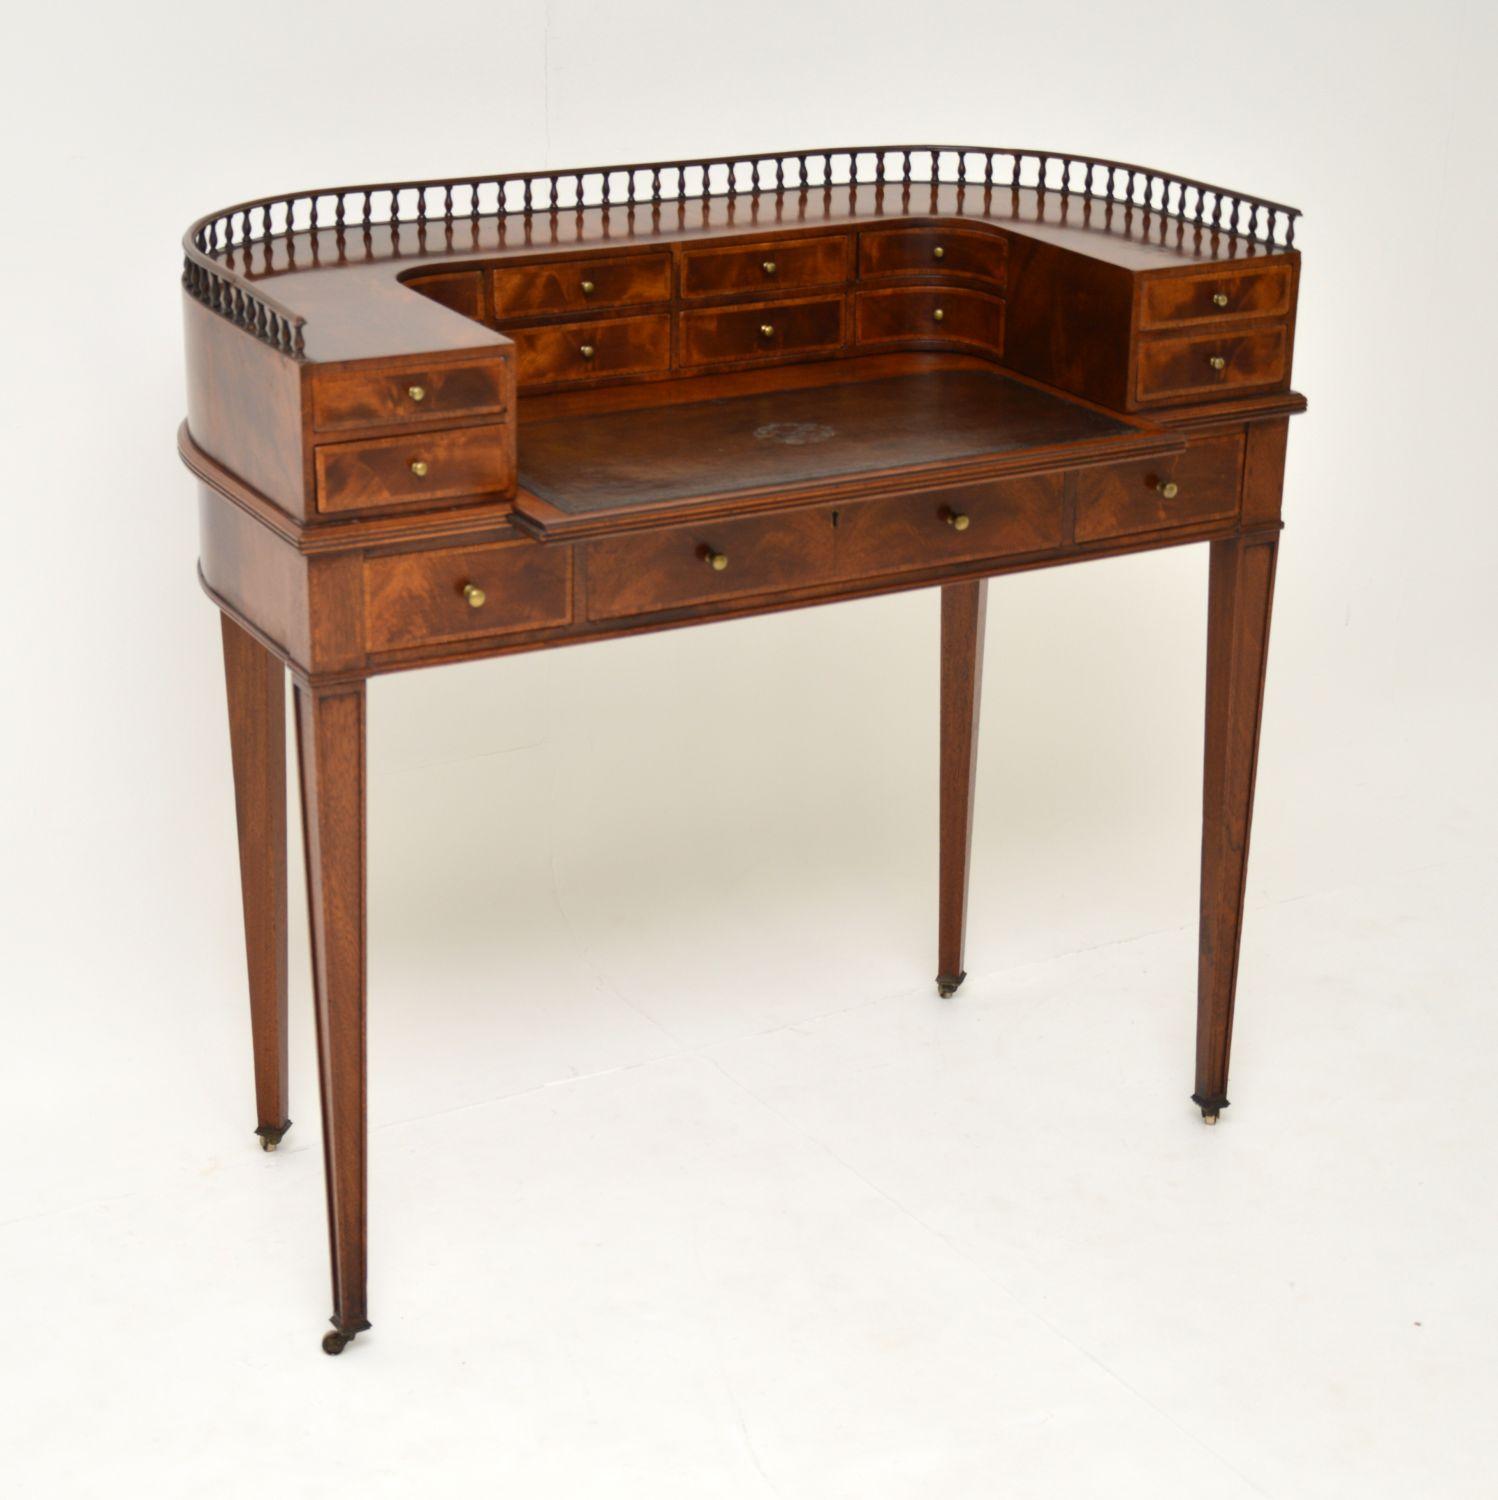 A beautiful and quite petite antique Carlton House desk in mahogany with an intricately tooled leather writing surface. This dates from circa late 19th century, probably 1890s-1900s.

It is an unusual size and of really high quality, with